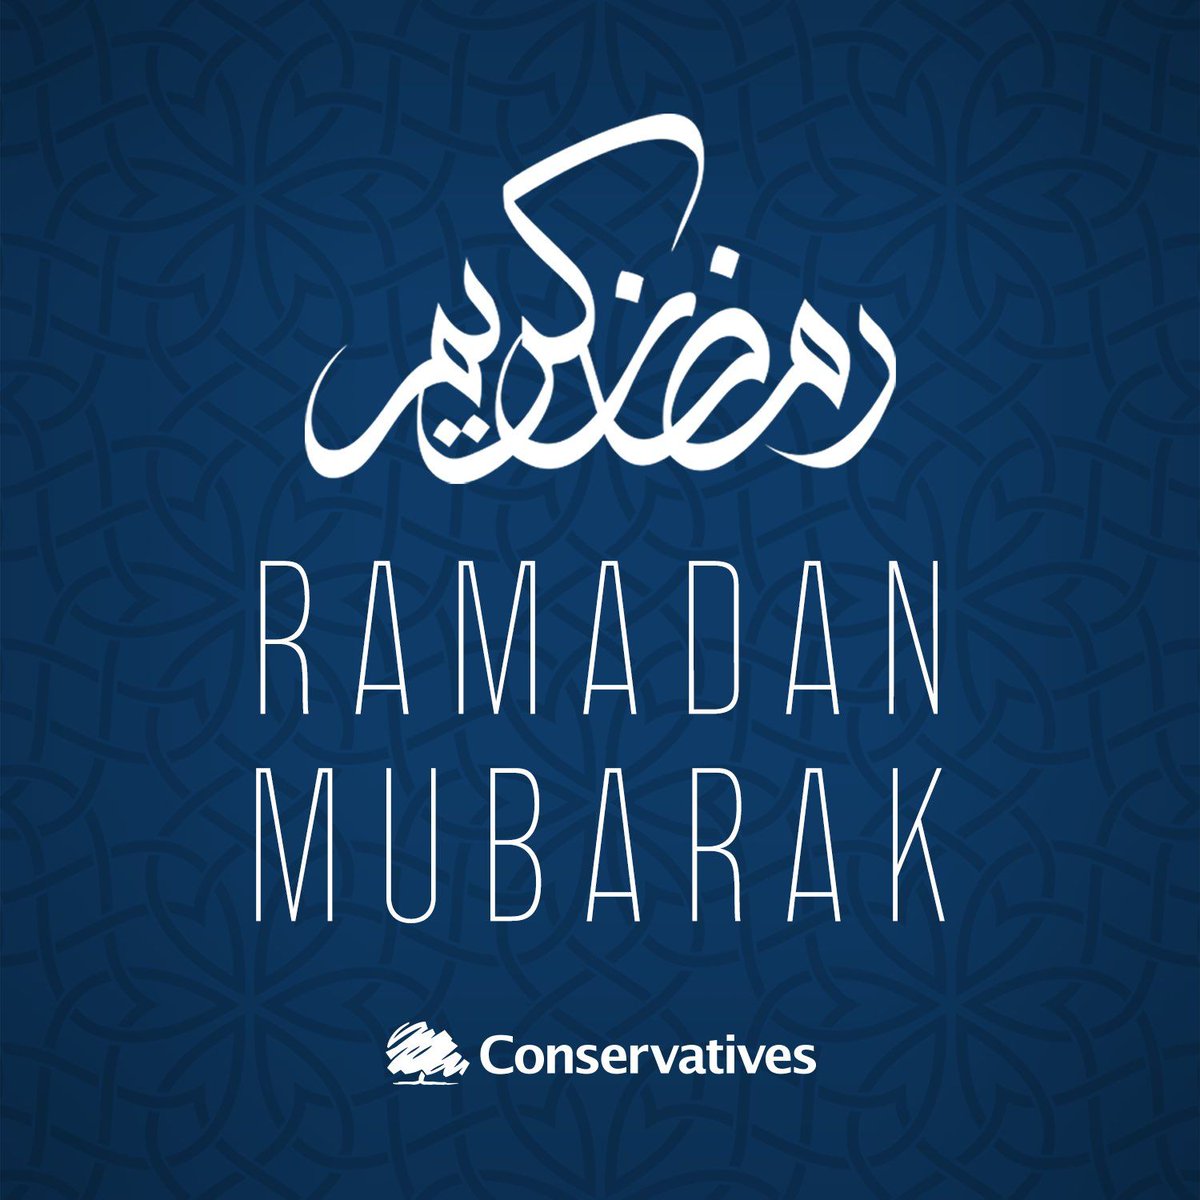 Wishing a happy and blessed Ramadan to Muslims in Dudley South and around the world 🌙 #ramadanmubarak